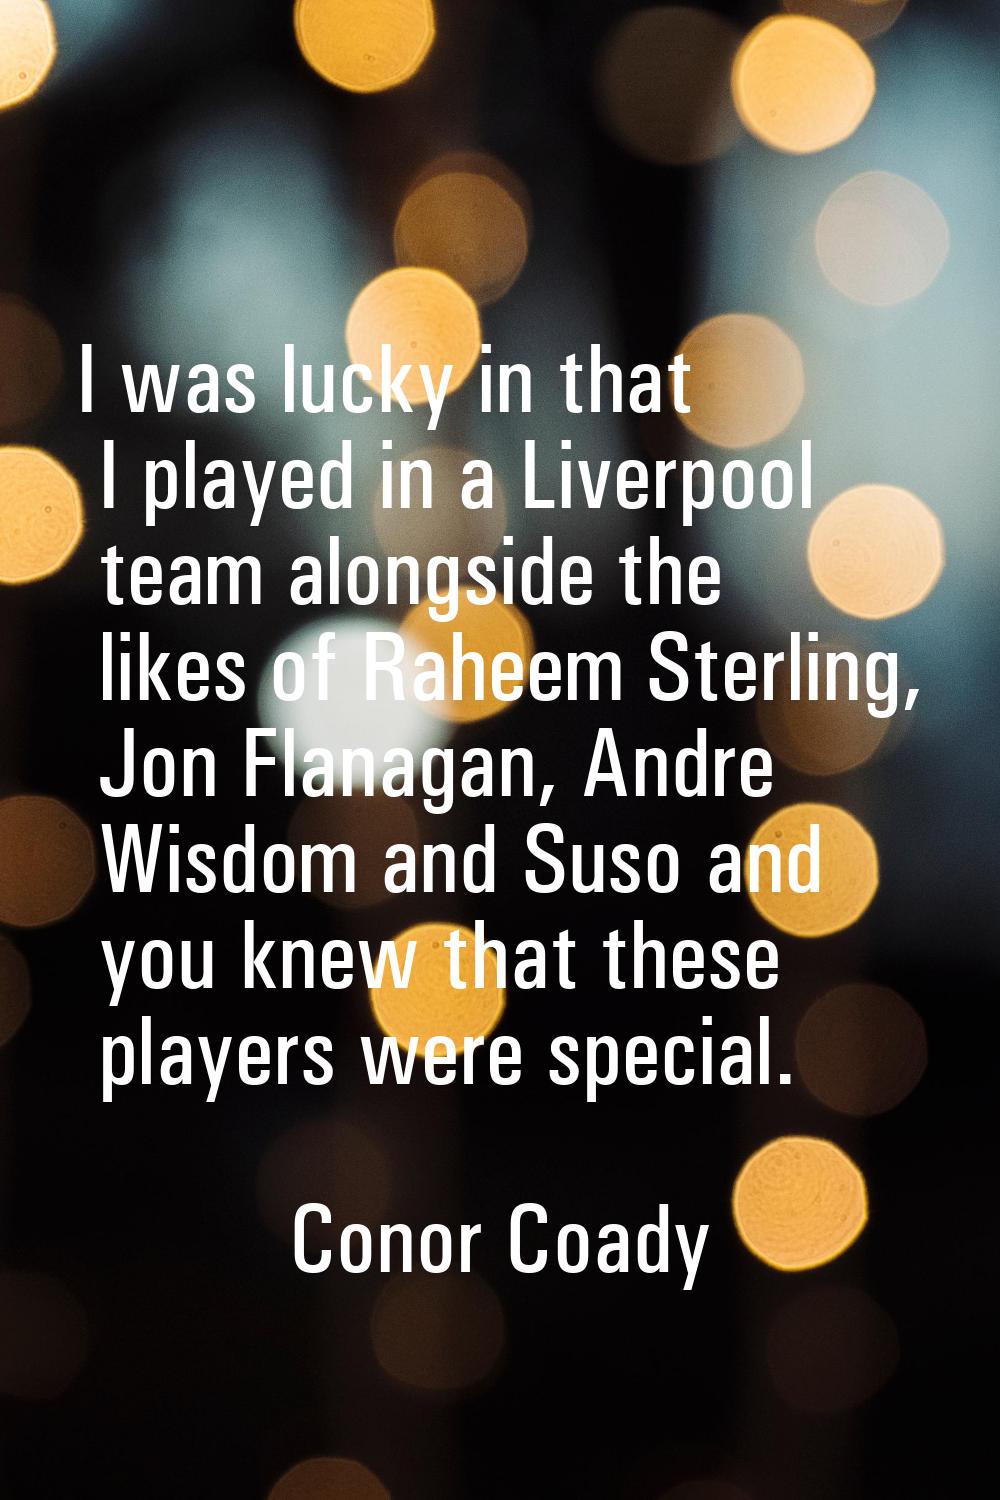 I was lucky in that I played in a Liverpool team alongside the likes of Raheem Sterling, Jon Flanag